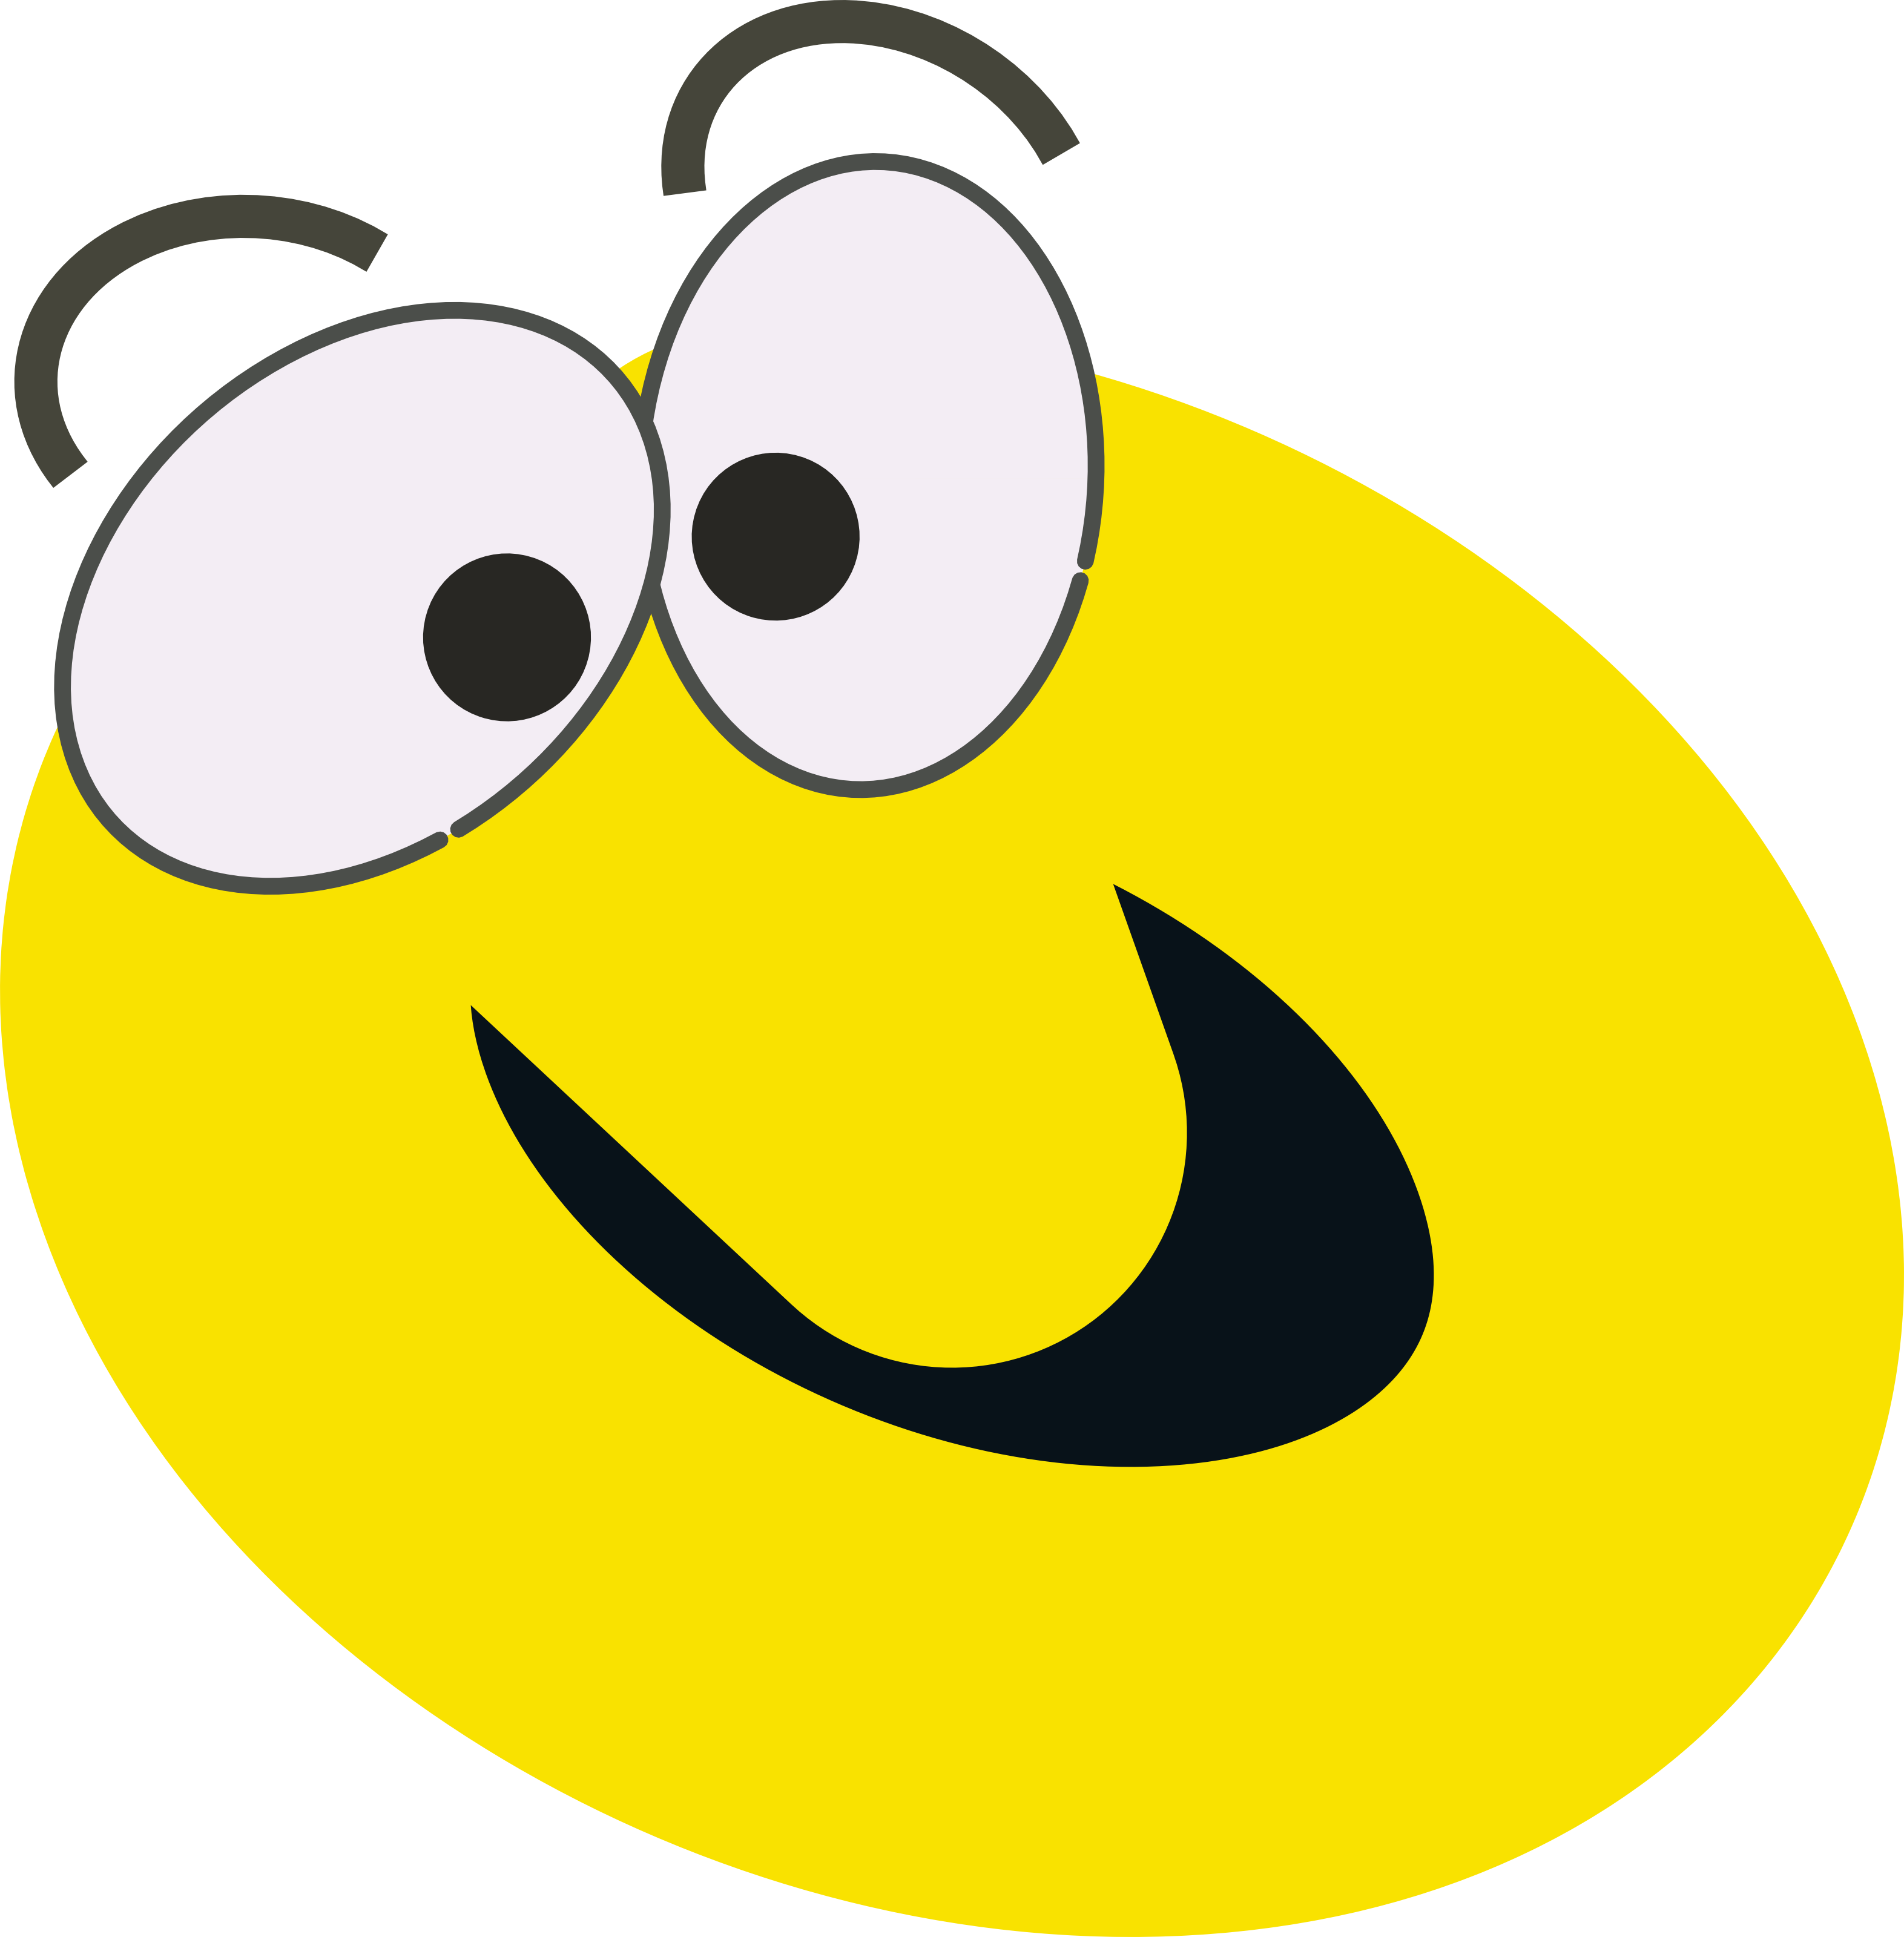 free clipart images smiley faces - photo #4